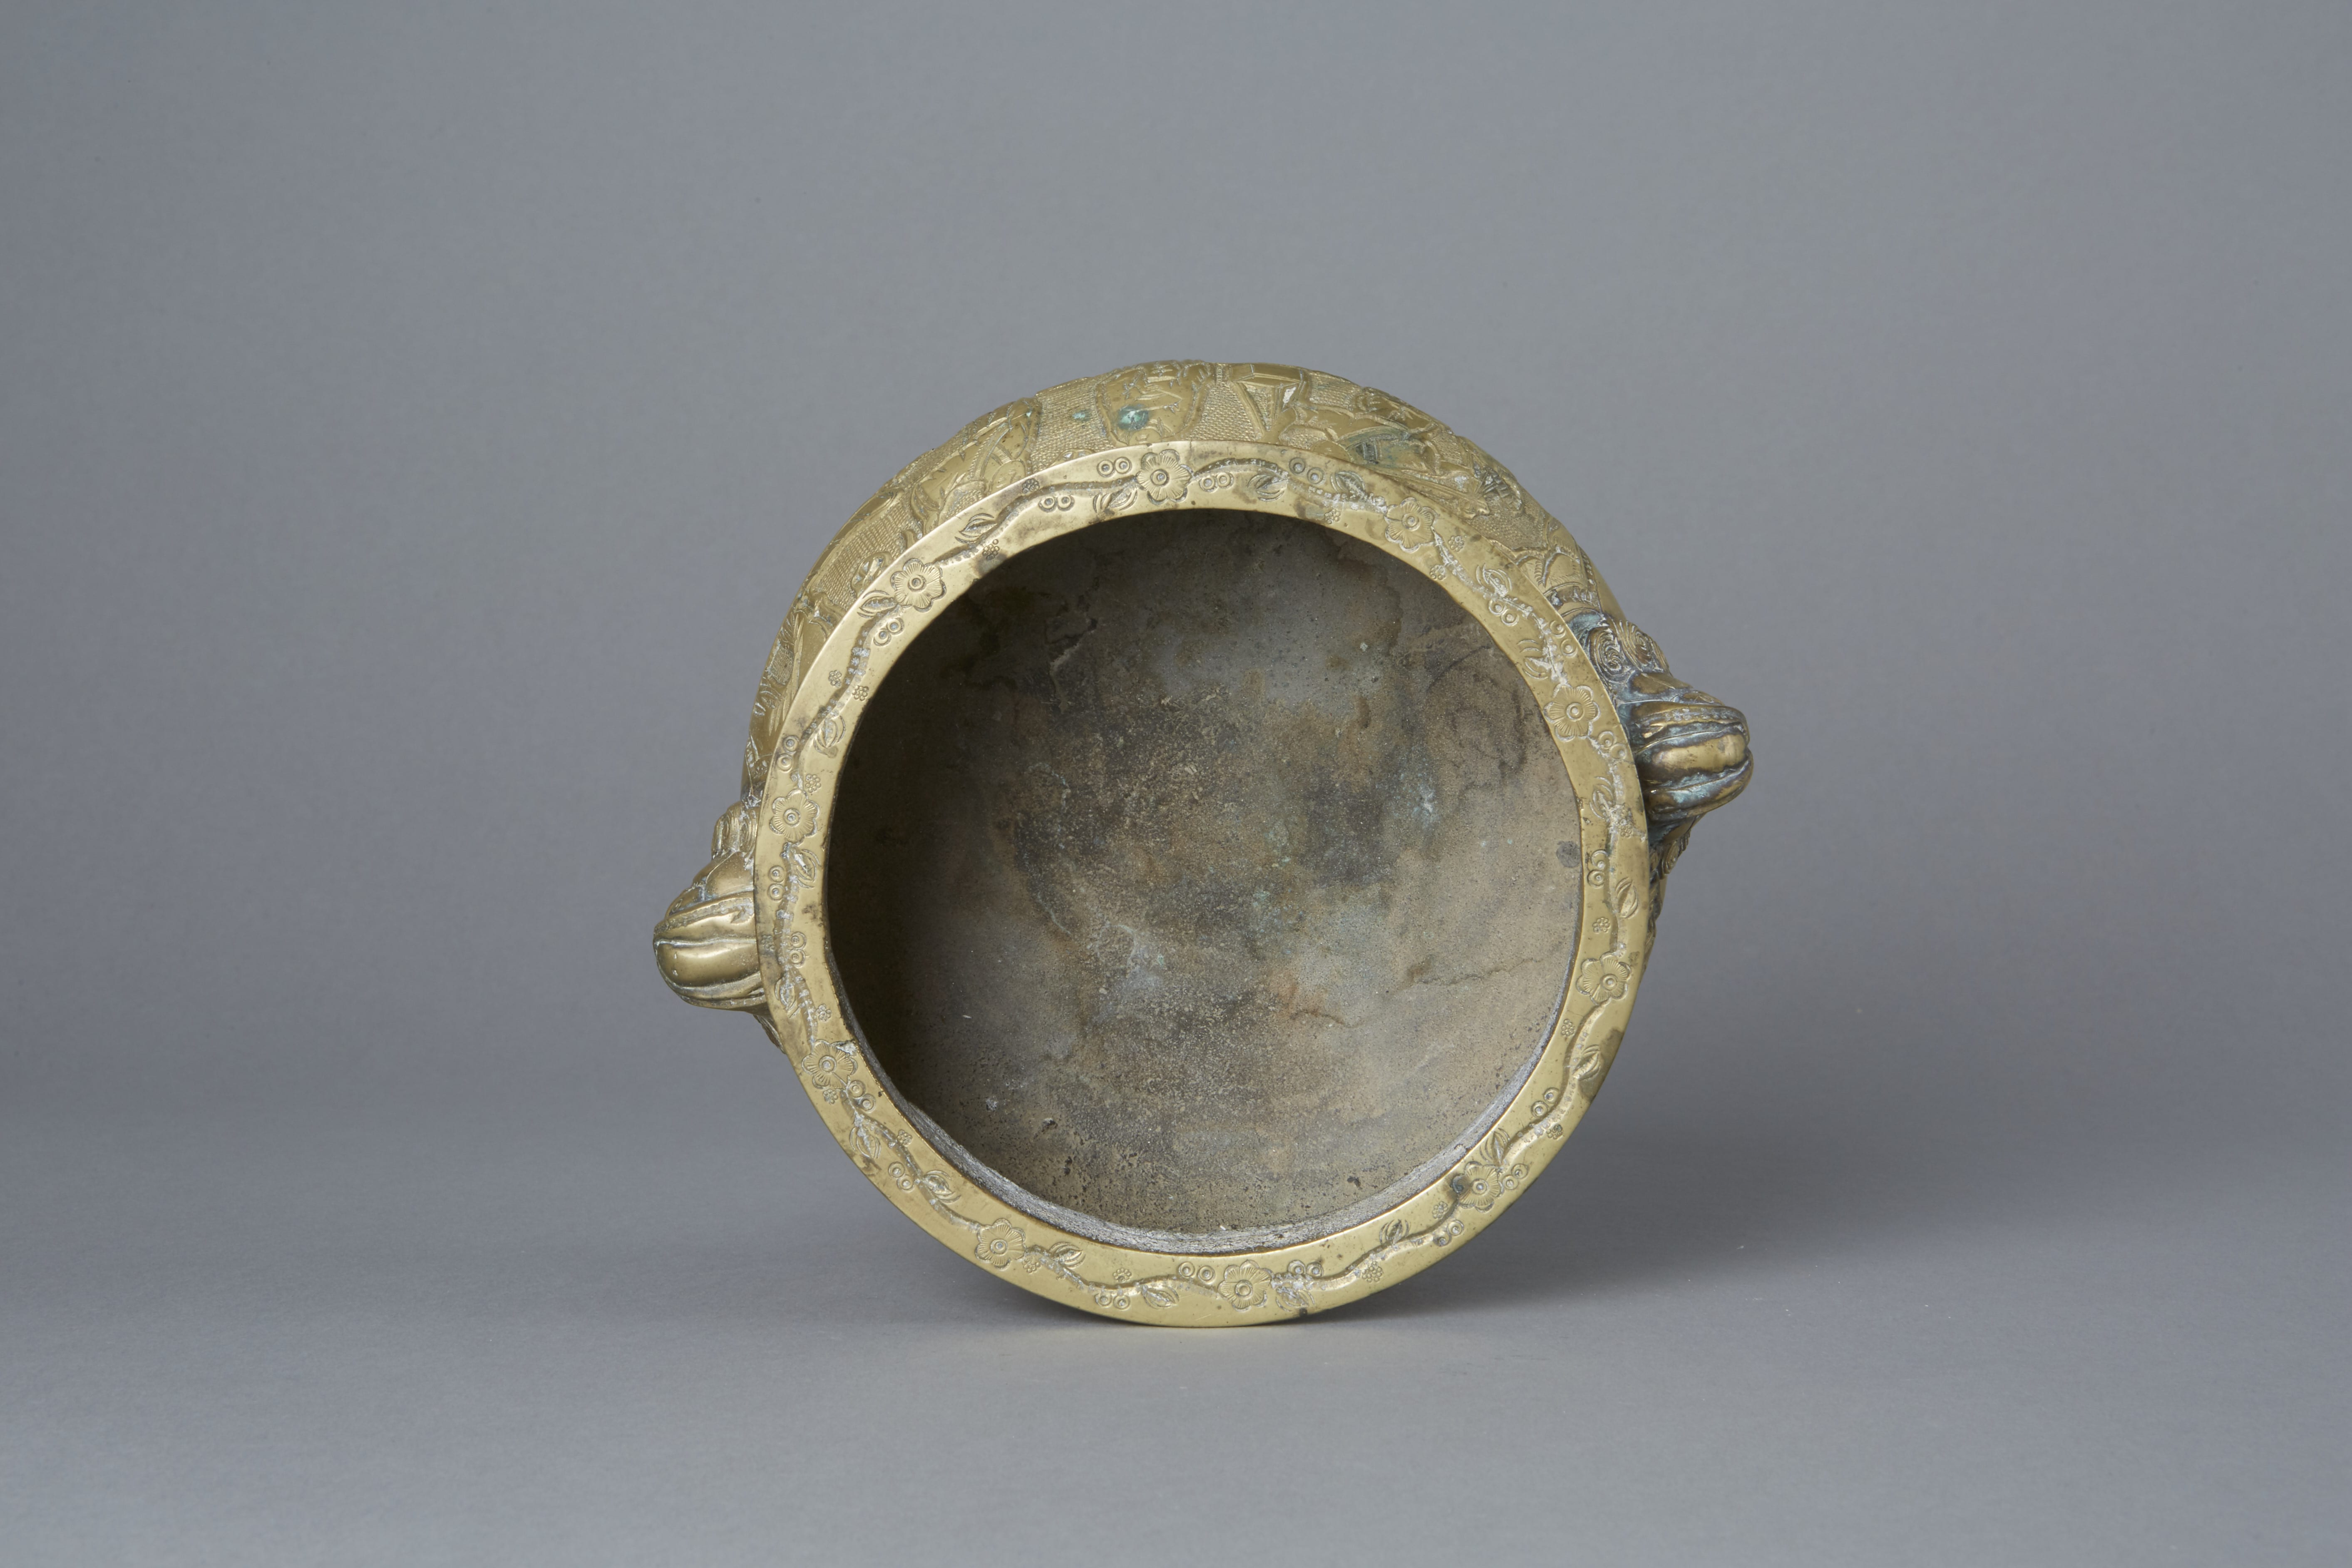 Lot 001: Chinese Bronze Censer with incised decoration - Xuande Mark